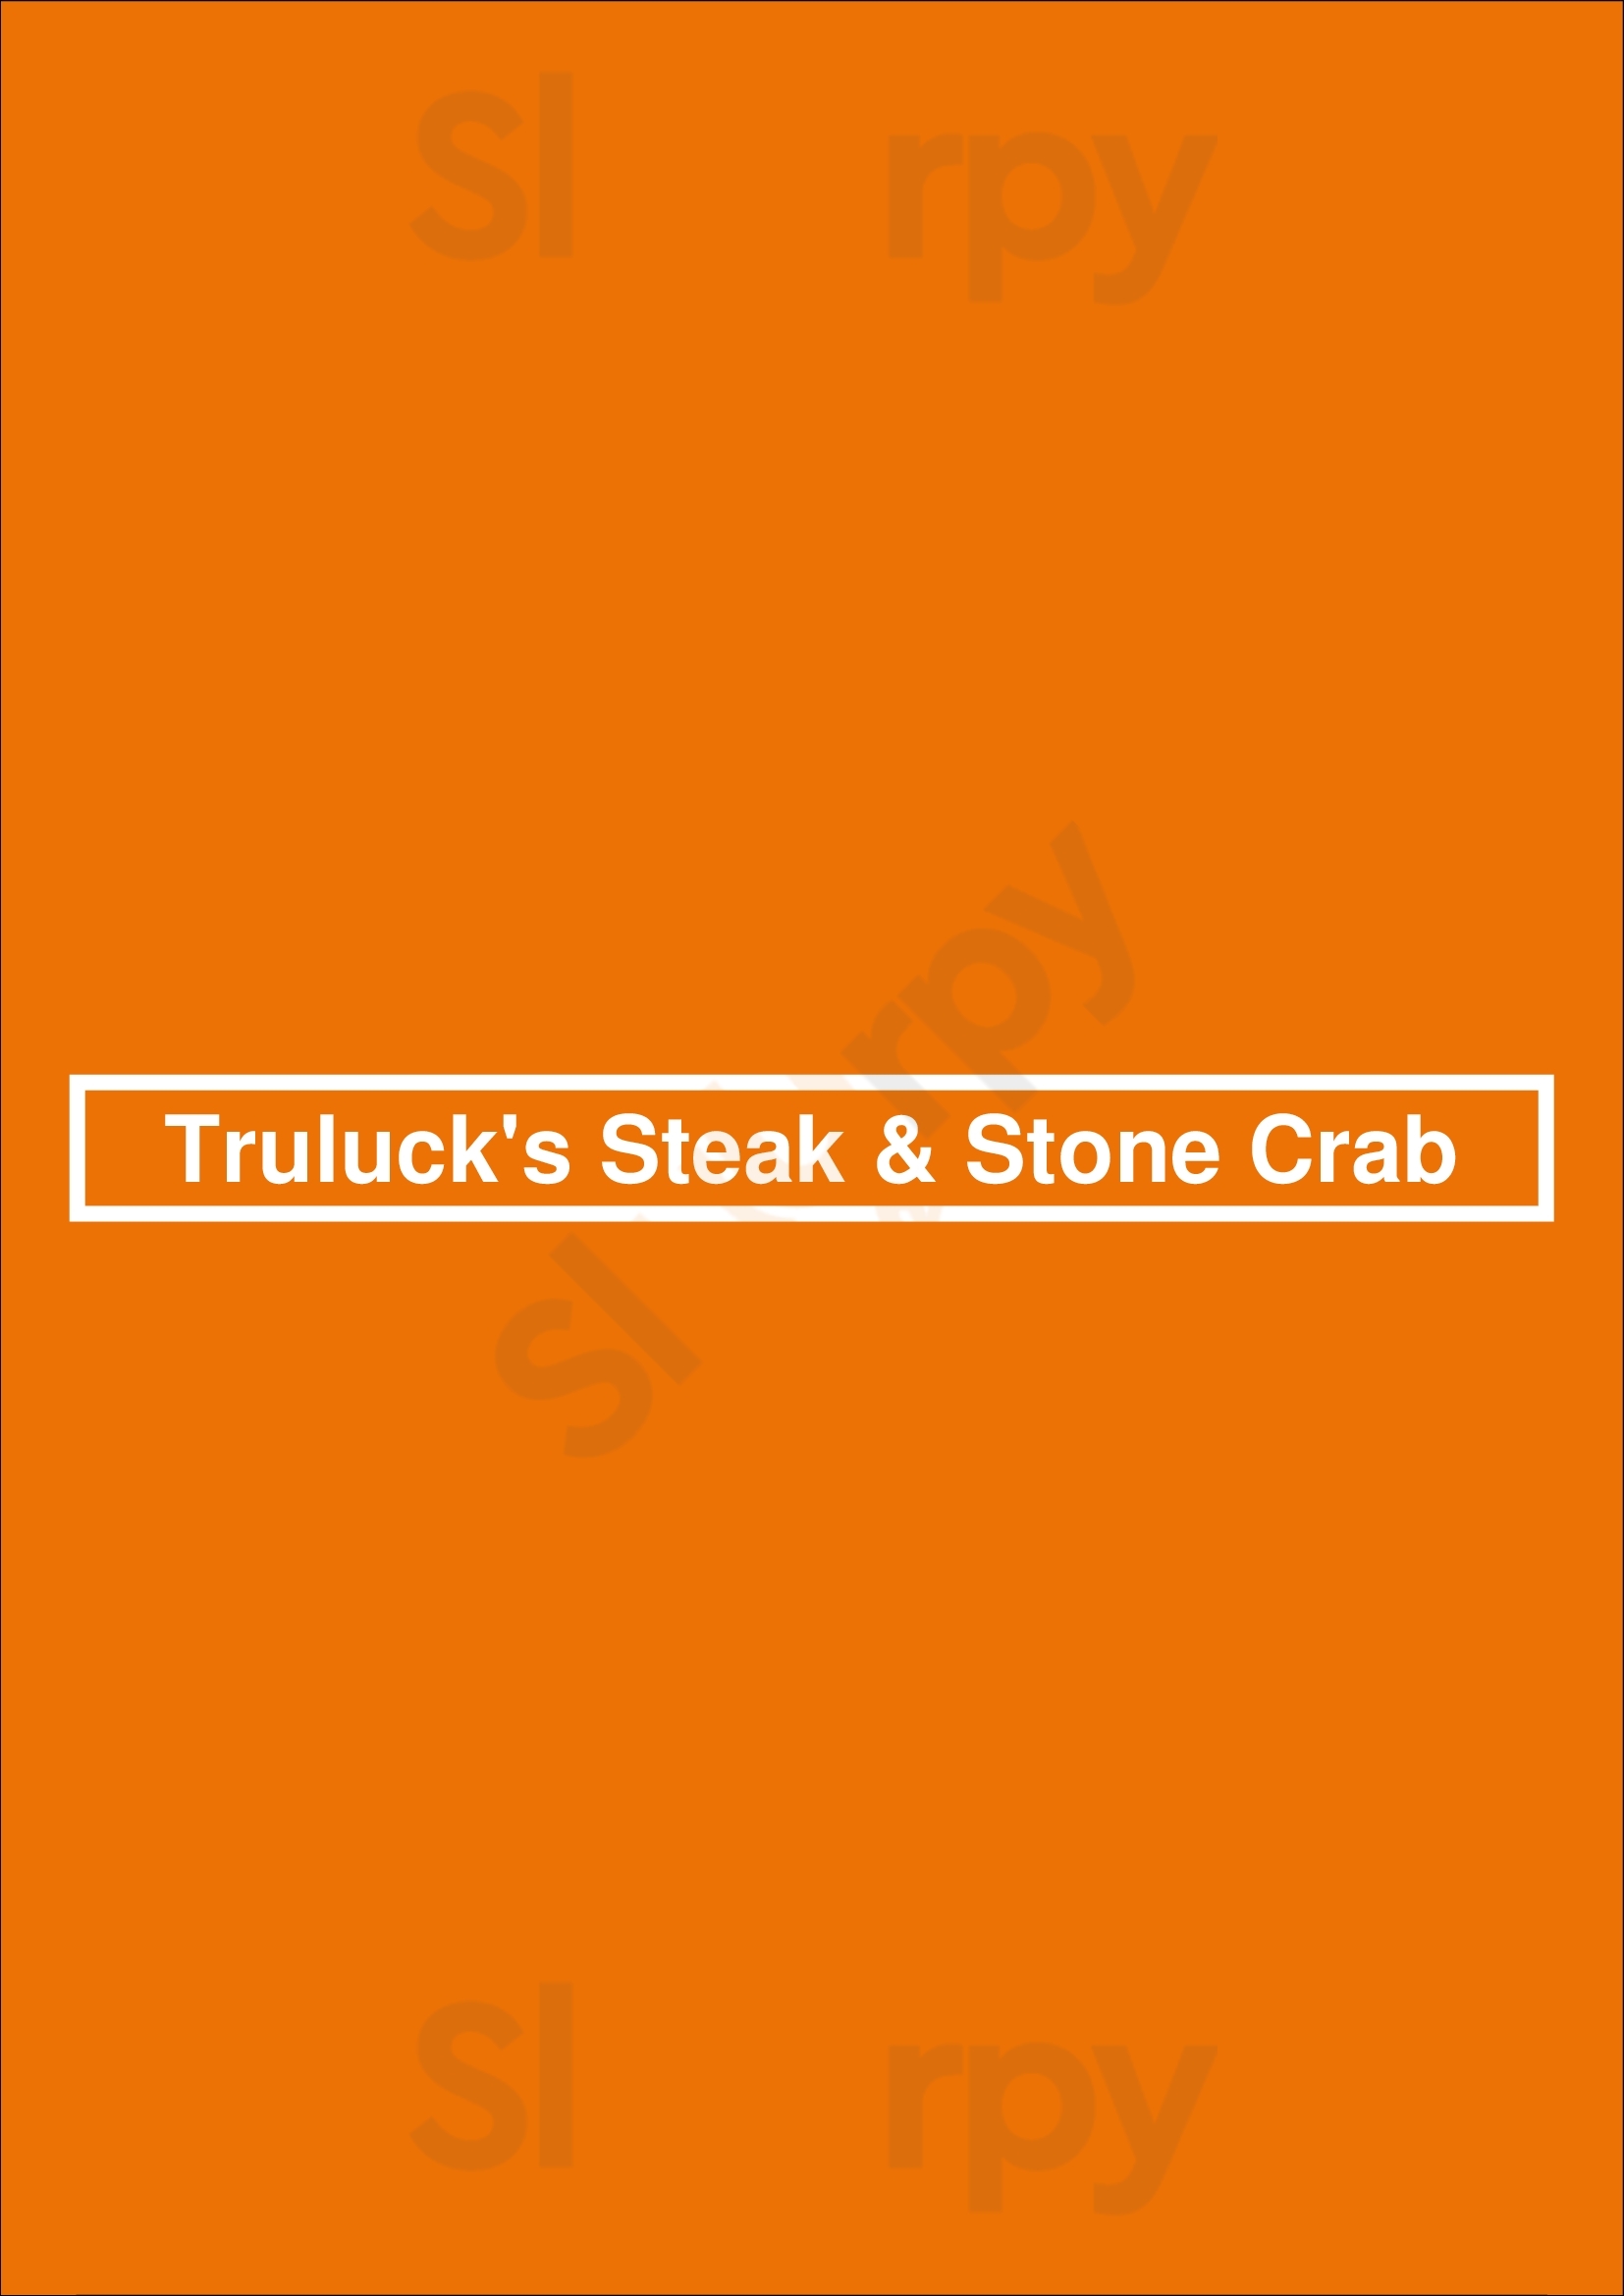 Truluck's Ocean's Finest Seafood And Crab - Houston Houston Menu - 1